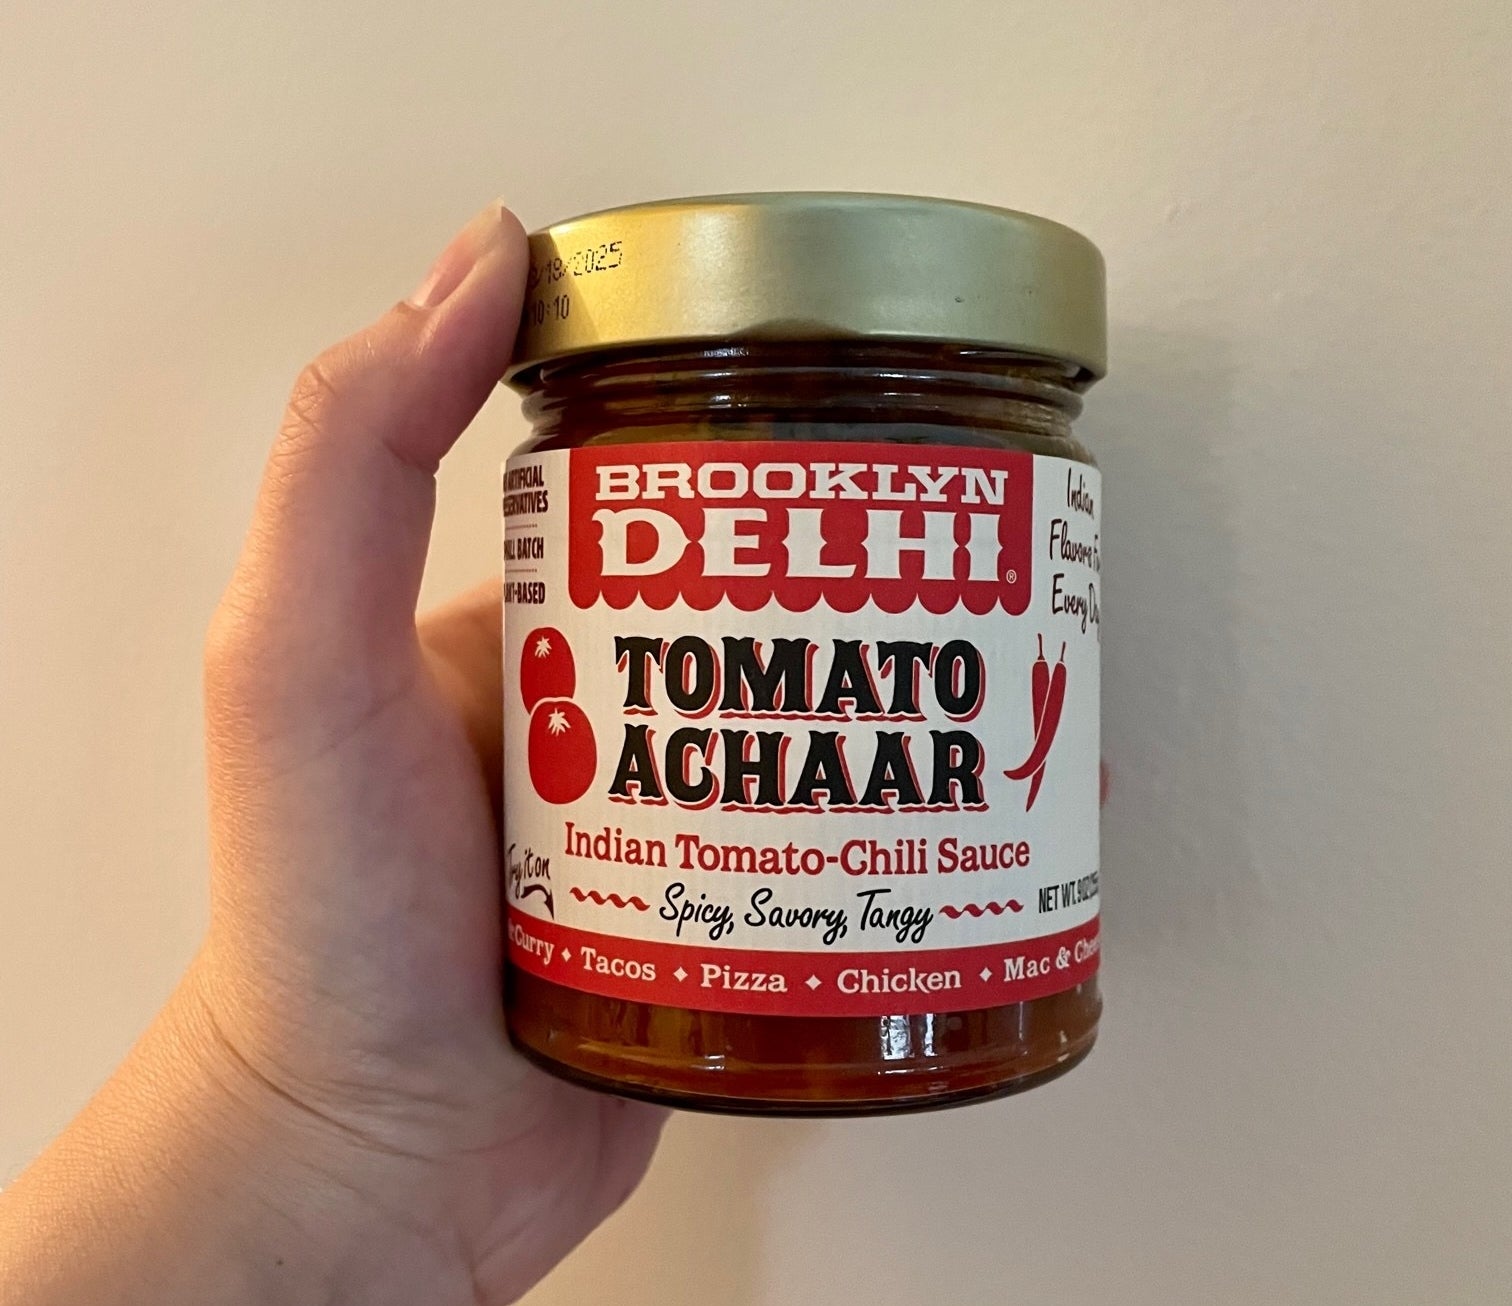 Writer holding up a jar of tomato achaar chili sauce